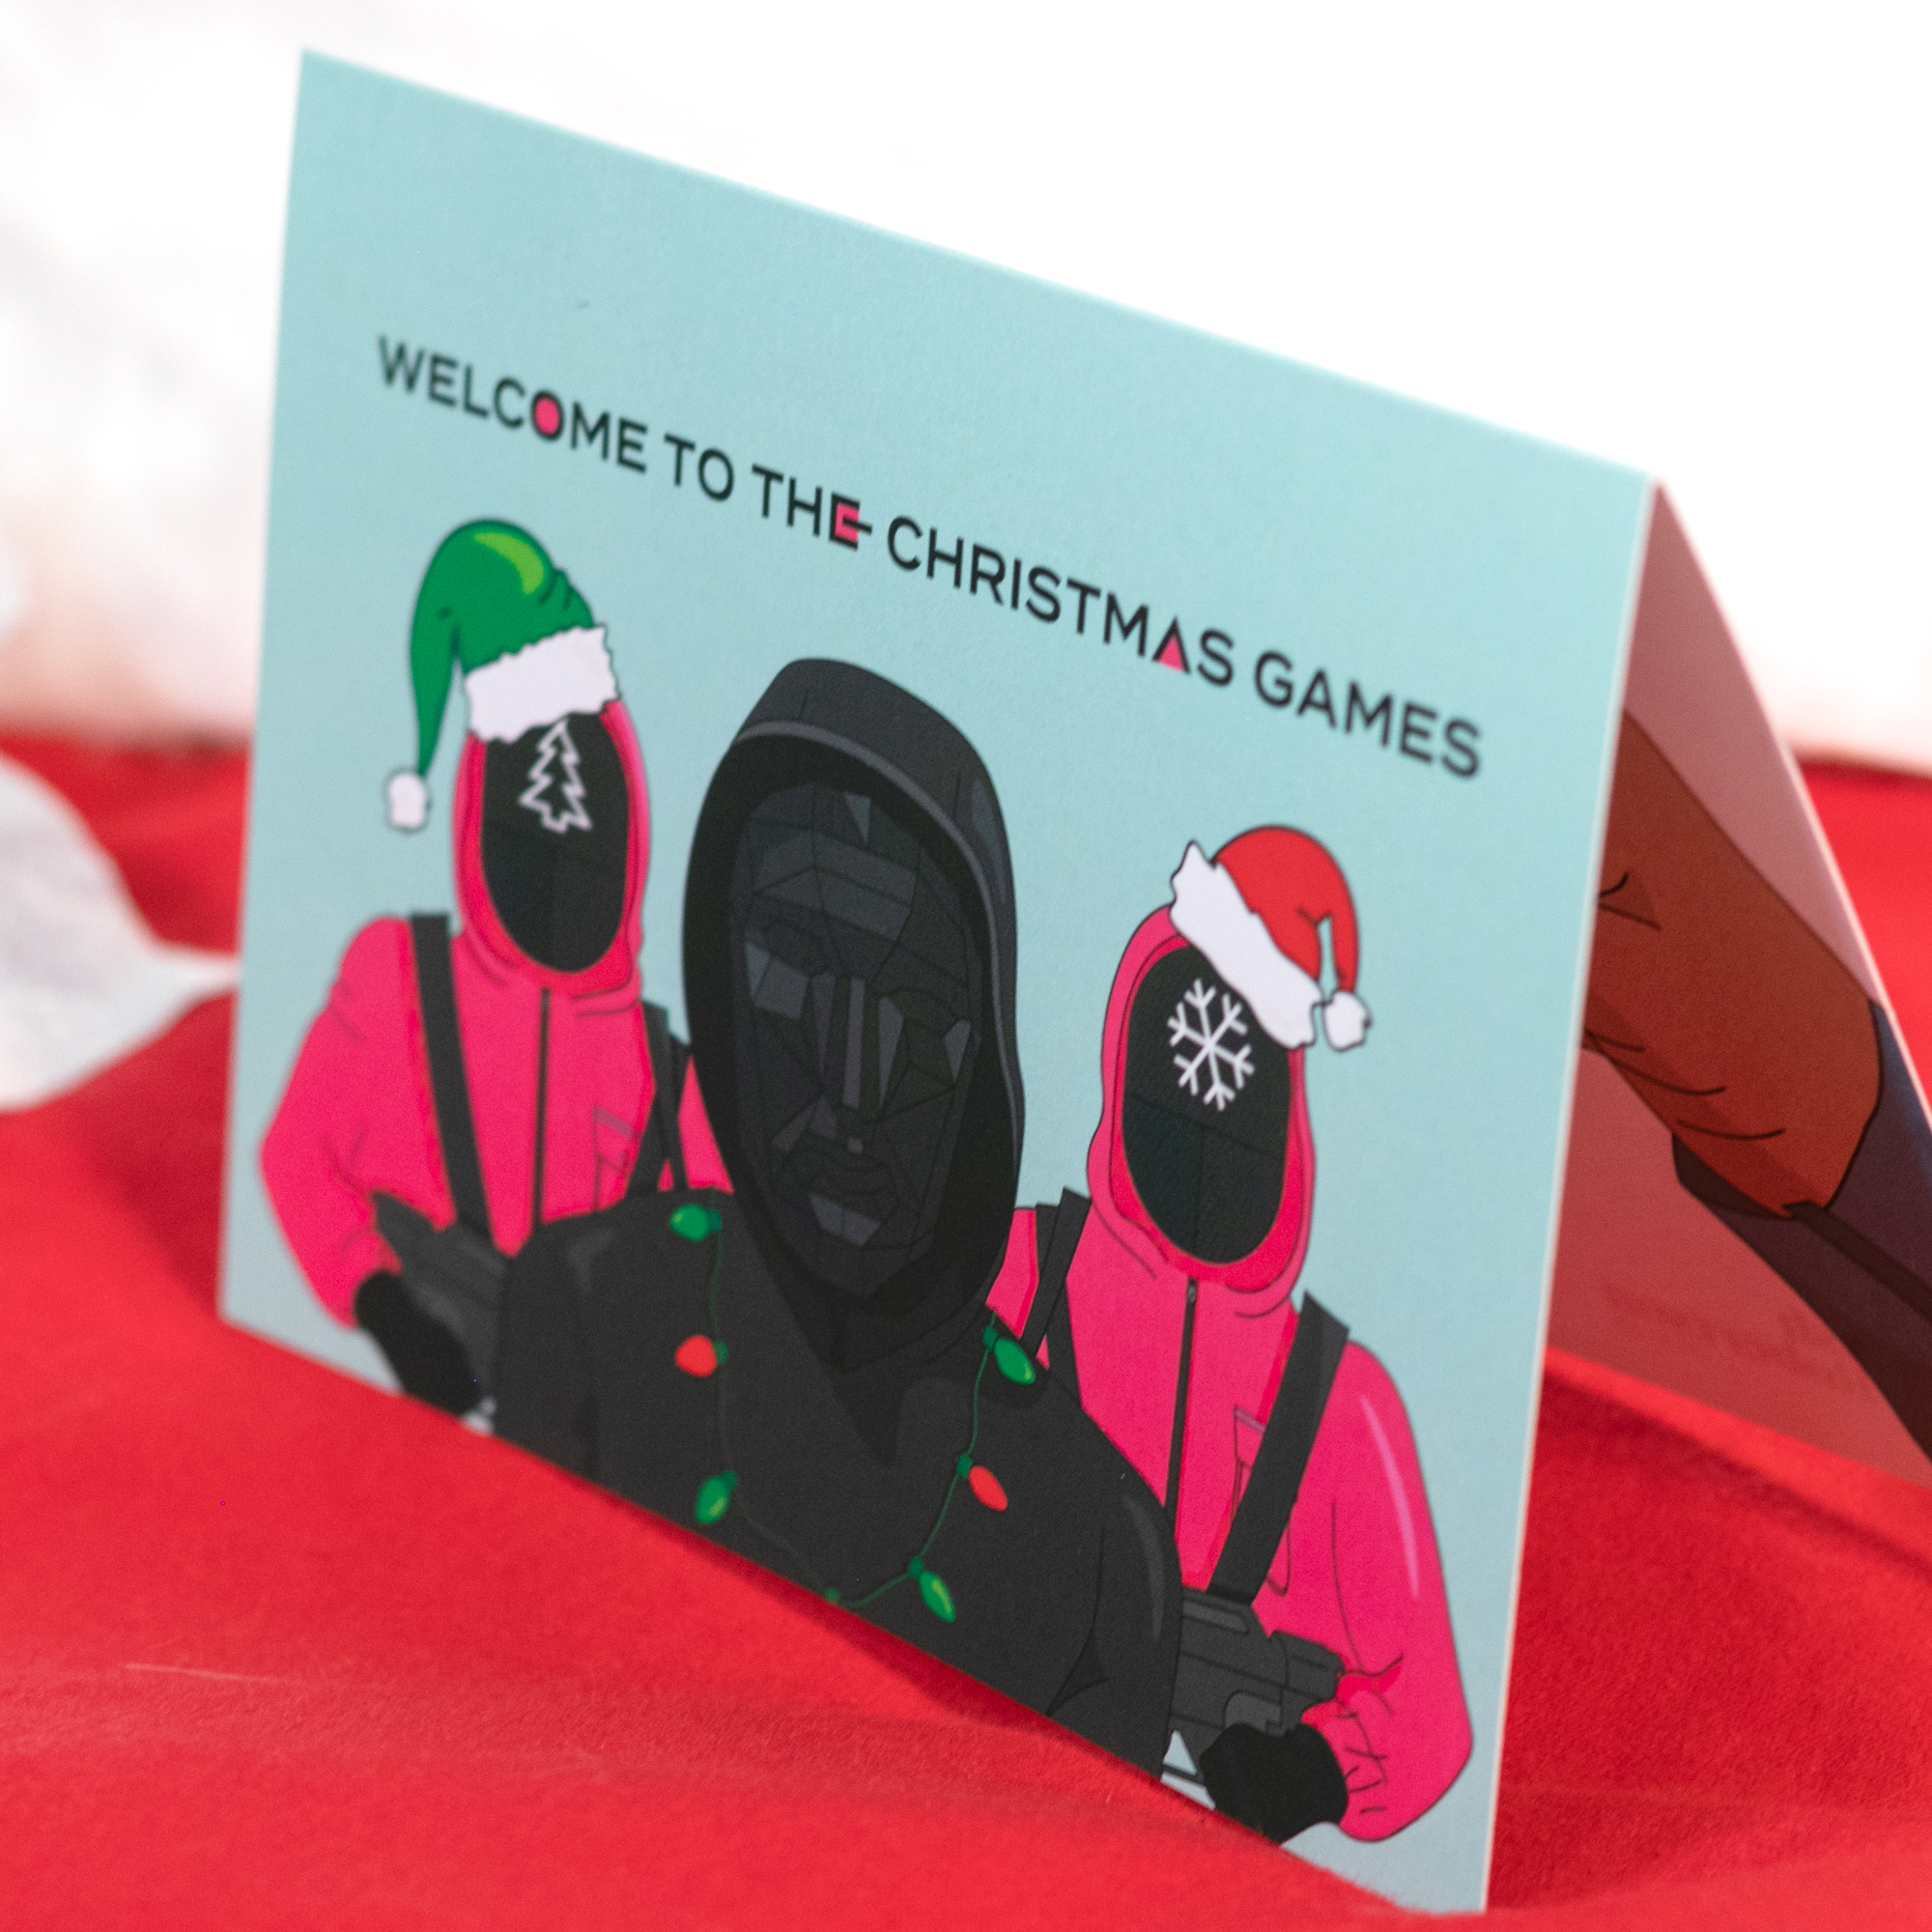 Welcome to the Christmas Games (Greeting Card) | Squid Game Parody | Ash Robertson Design | Side Angle